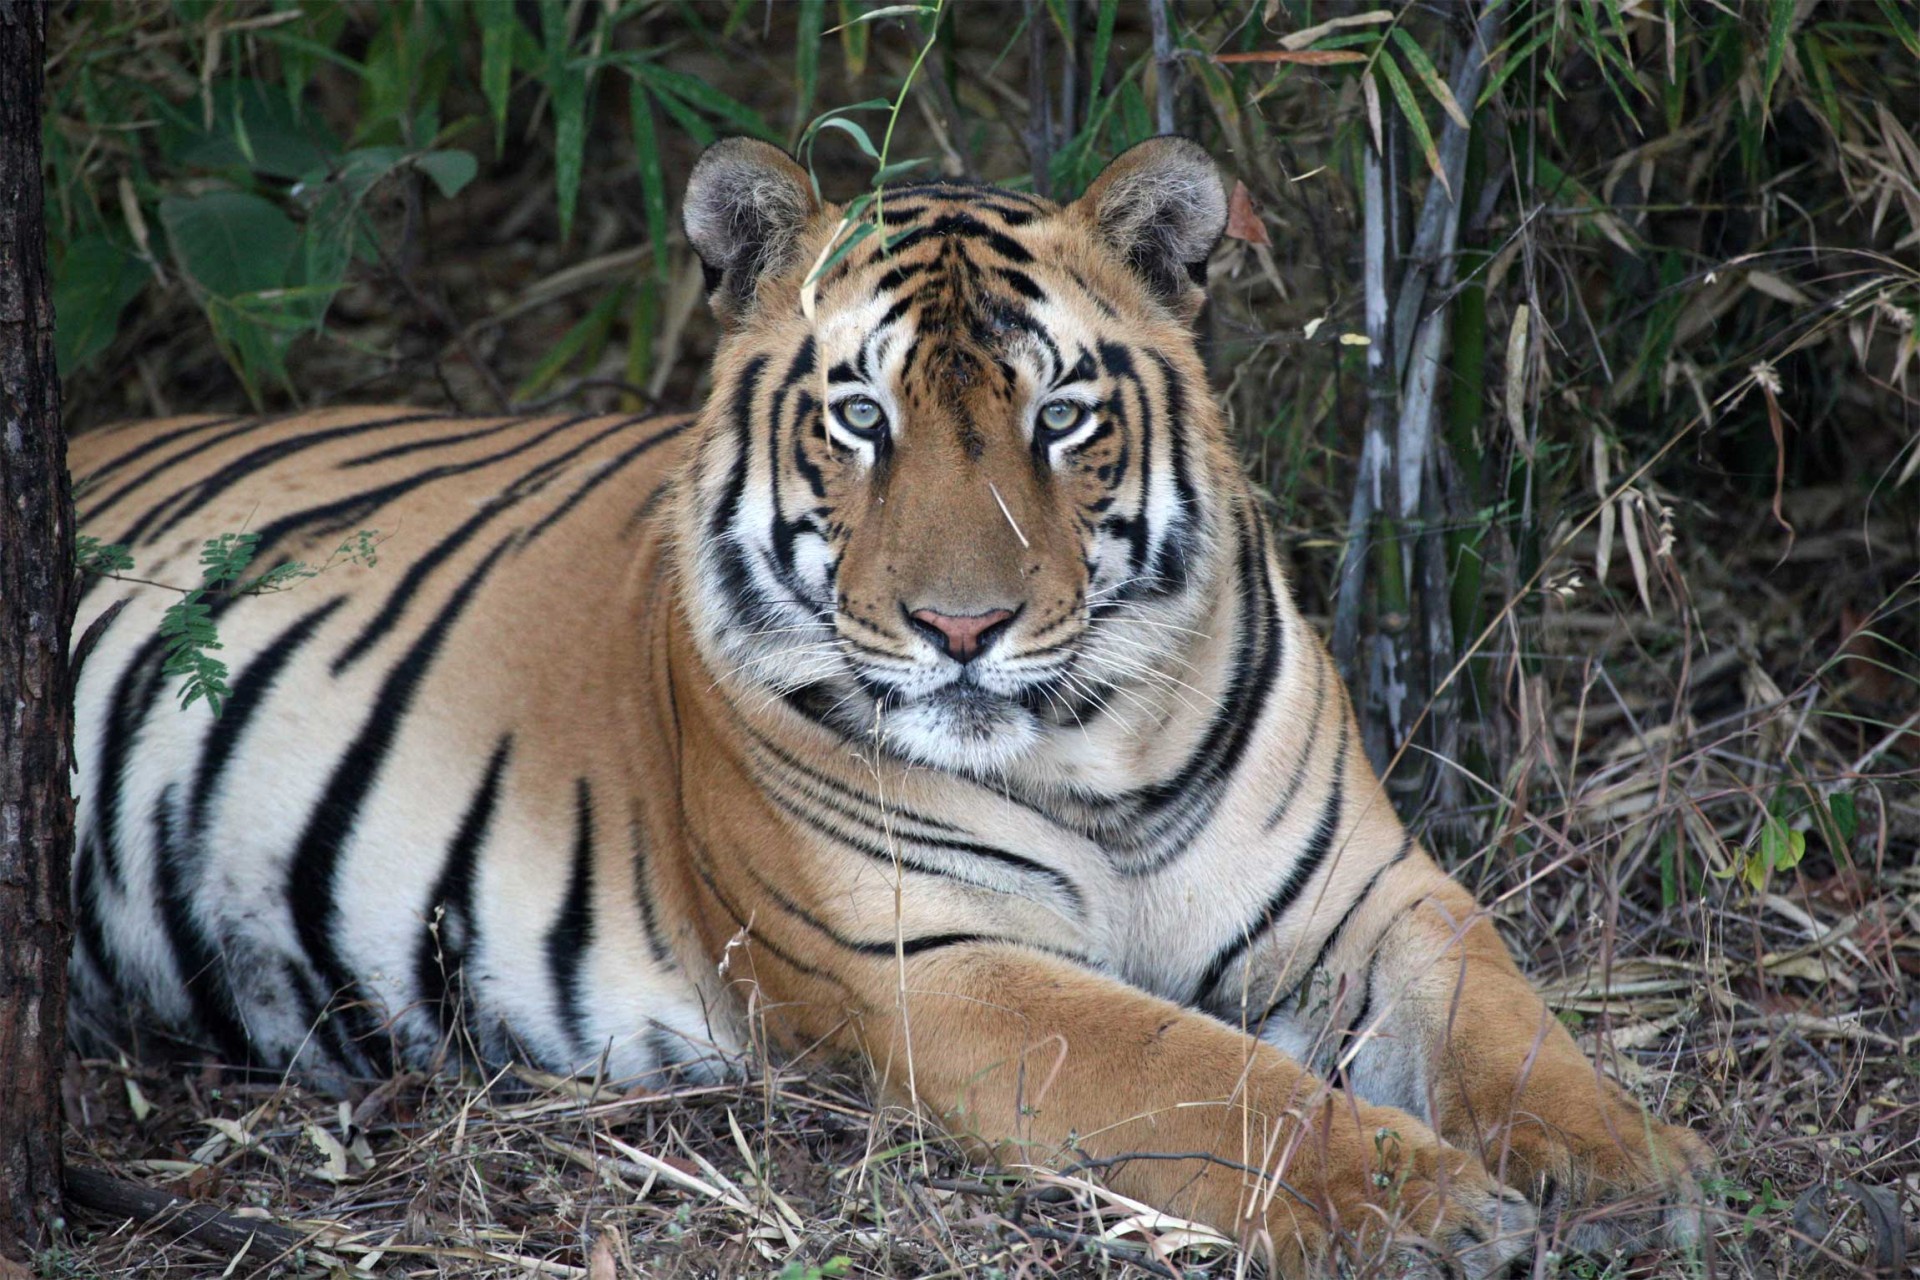 India’s Tigers On A Budget - an affordable tiger tour.